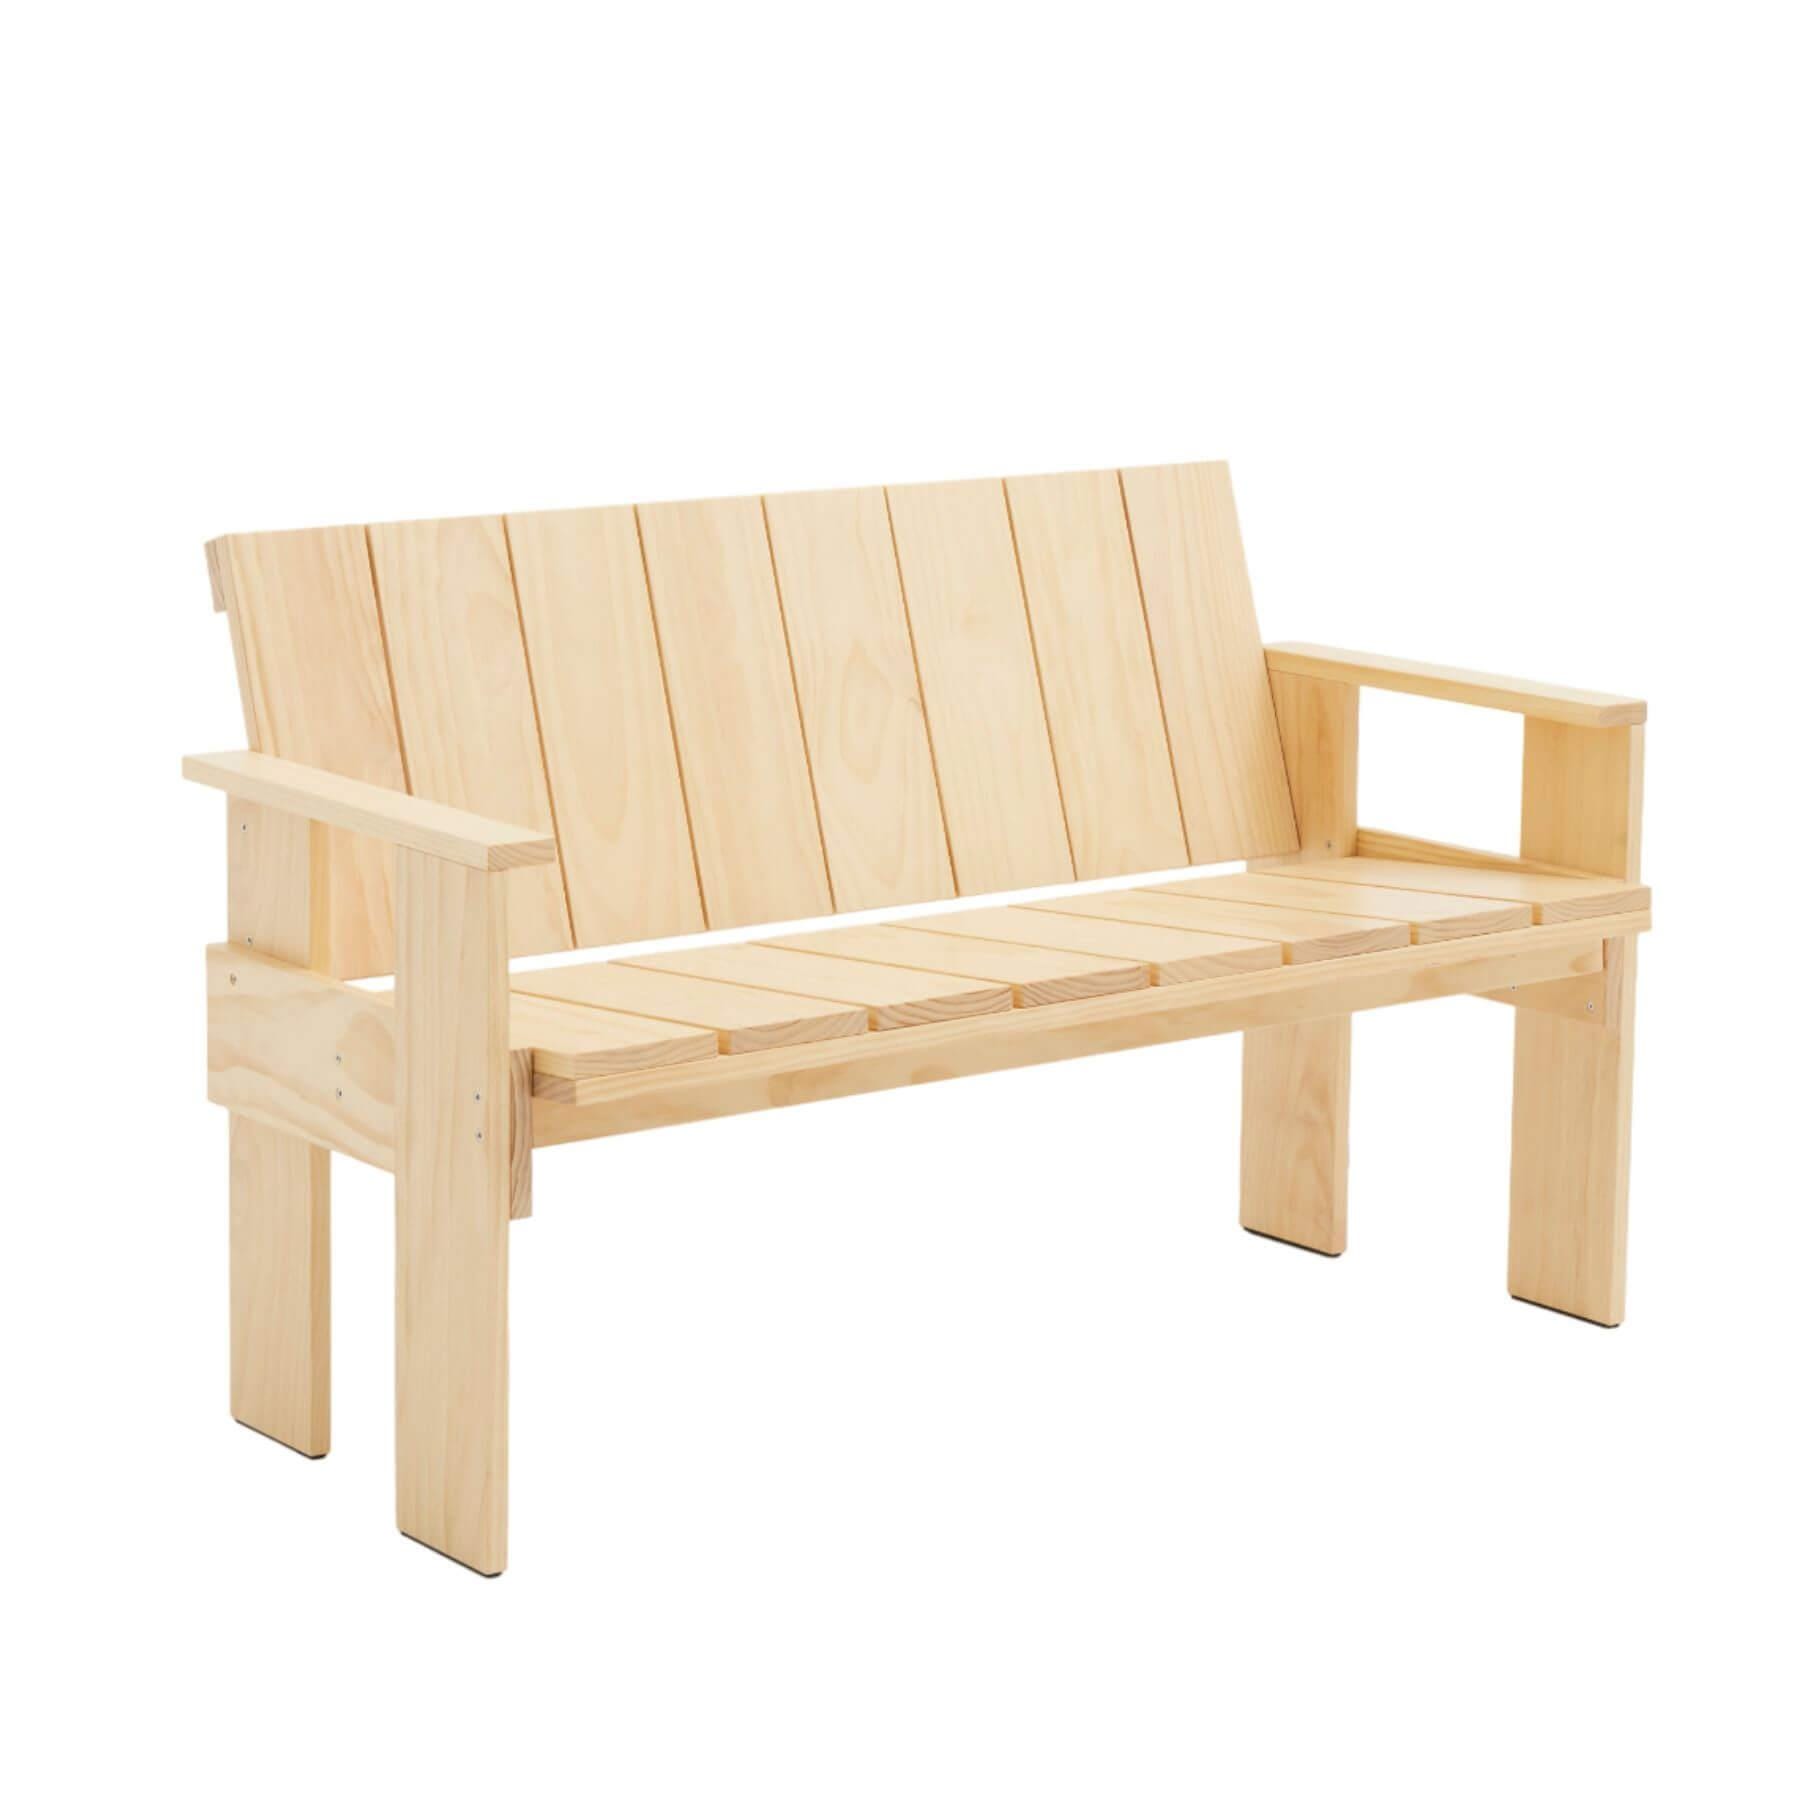 Hay Crate Dining Bench Pinewood Designer Furniture From Holloways Of Ludlow